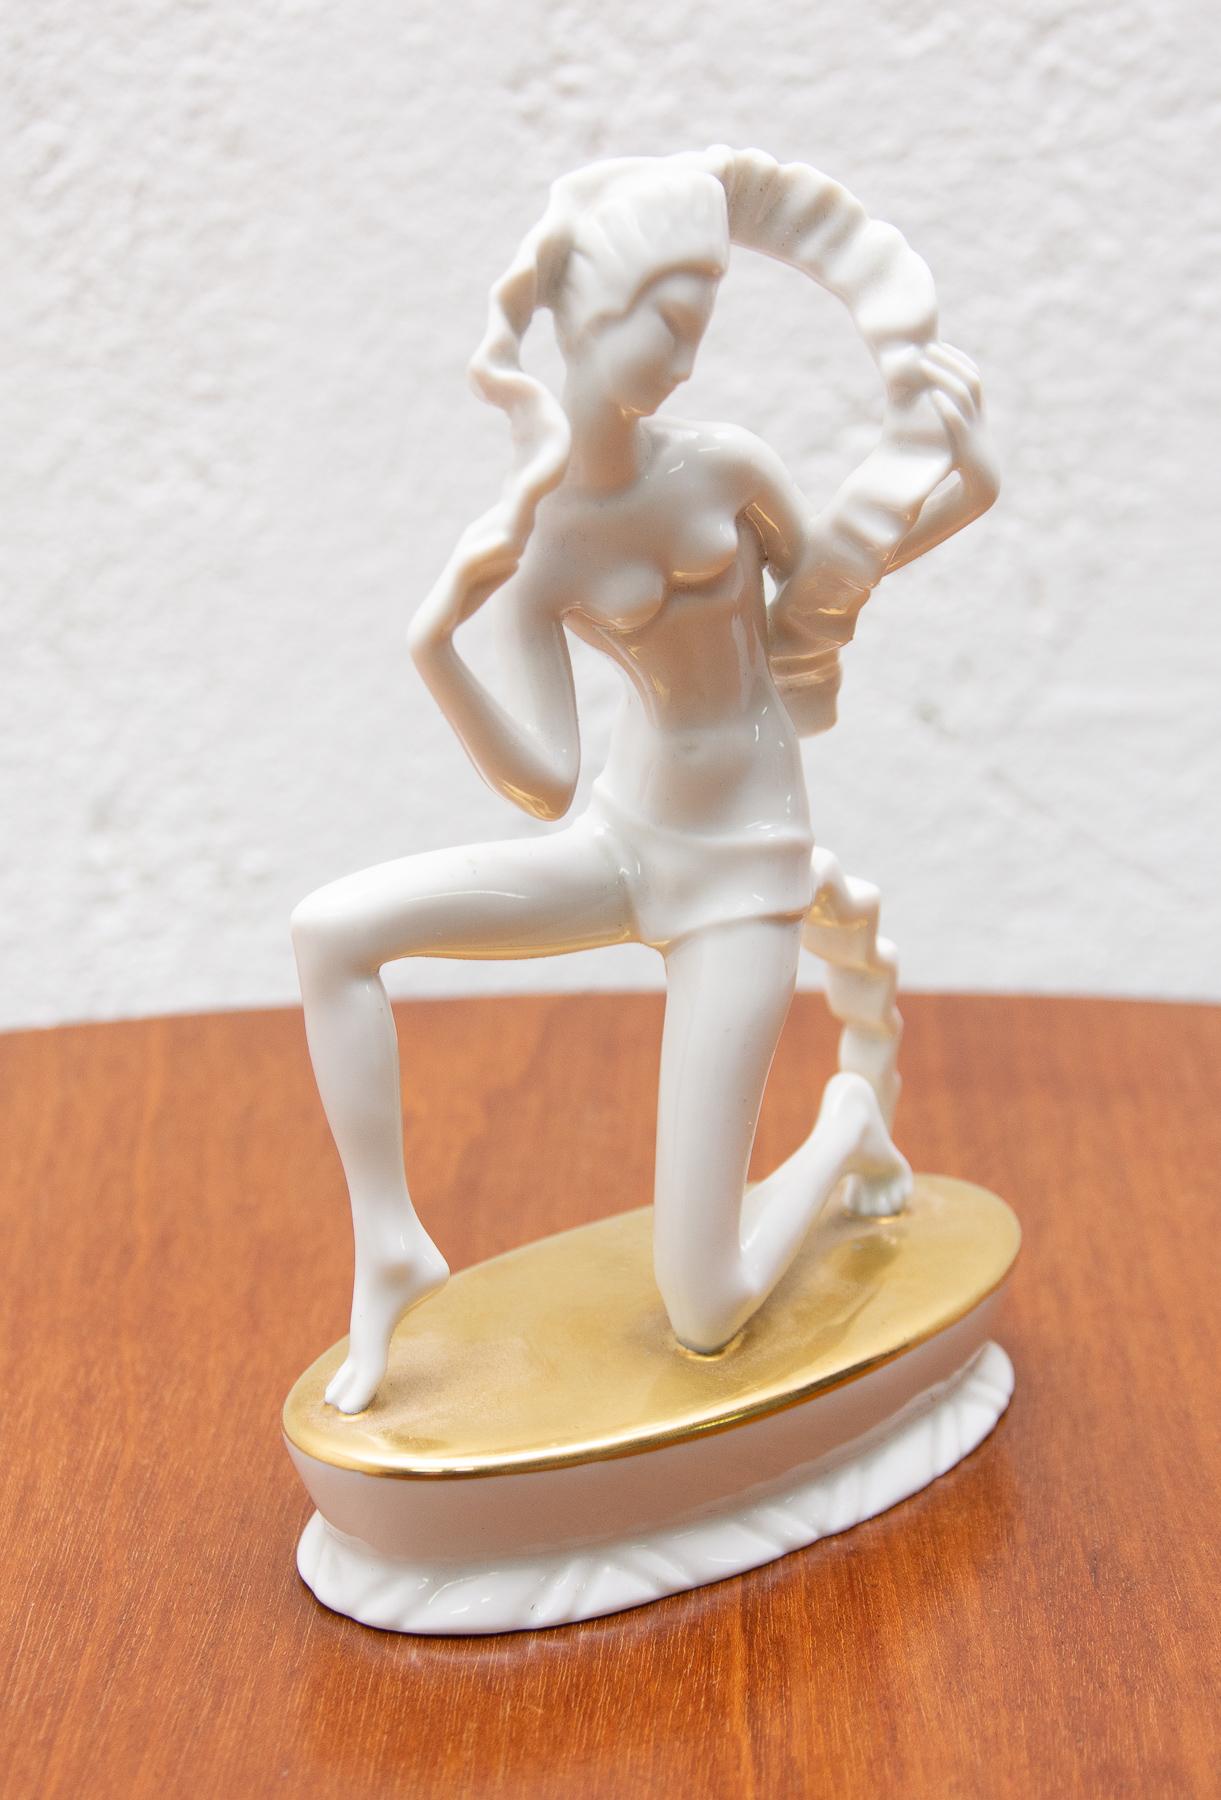 Mid-20th Century Art Deco Rosenthal Porcelain Girl Sculpture by Lothar Otto, 1927